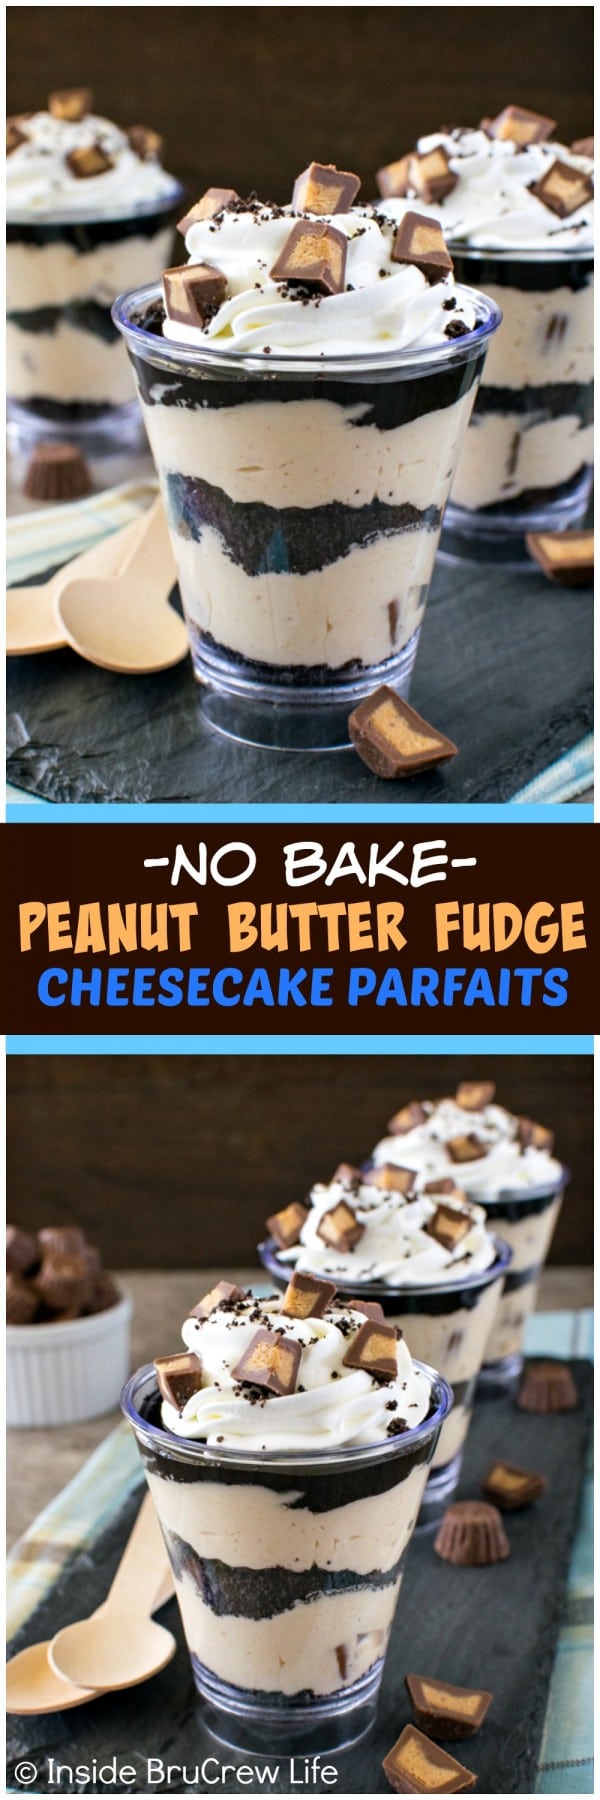 No Bake Peanut Butter Fudge Cheesecake Parfaits - layers of peanut butter, cookies, and fudge make this an easy dessert recipe to share at parties and dinners.